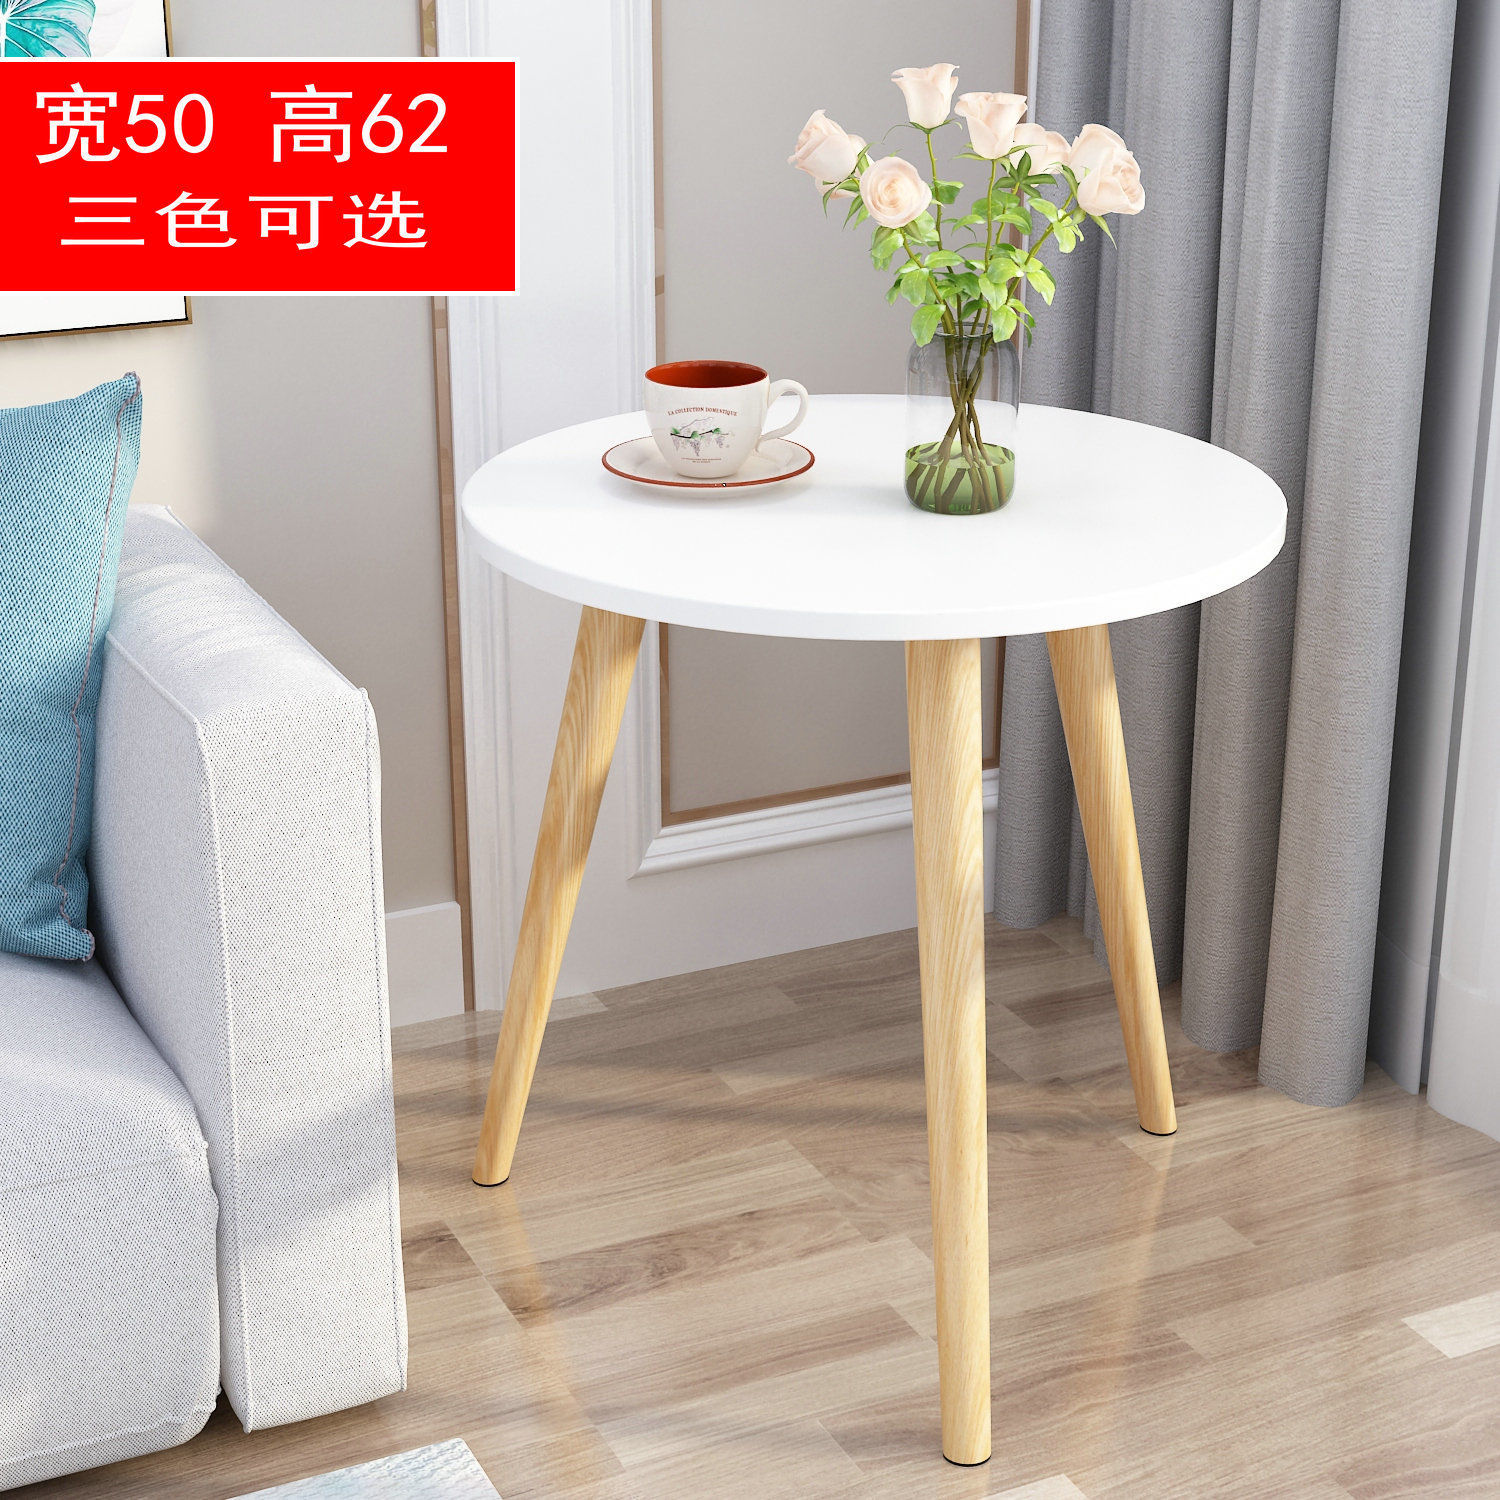 Coffee Table Simple Modern Nordic Mini Coffee Table Living Room Sofa Side Table Bedside Table Corner Table Small Round Table Shopee Singapore